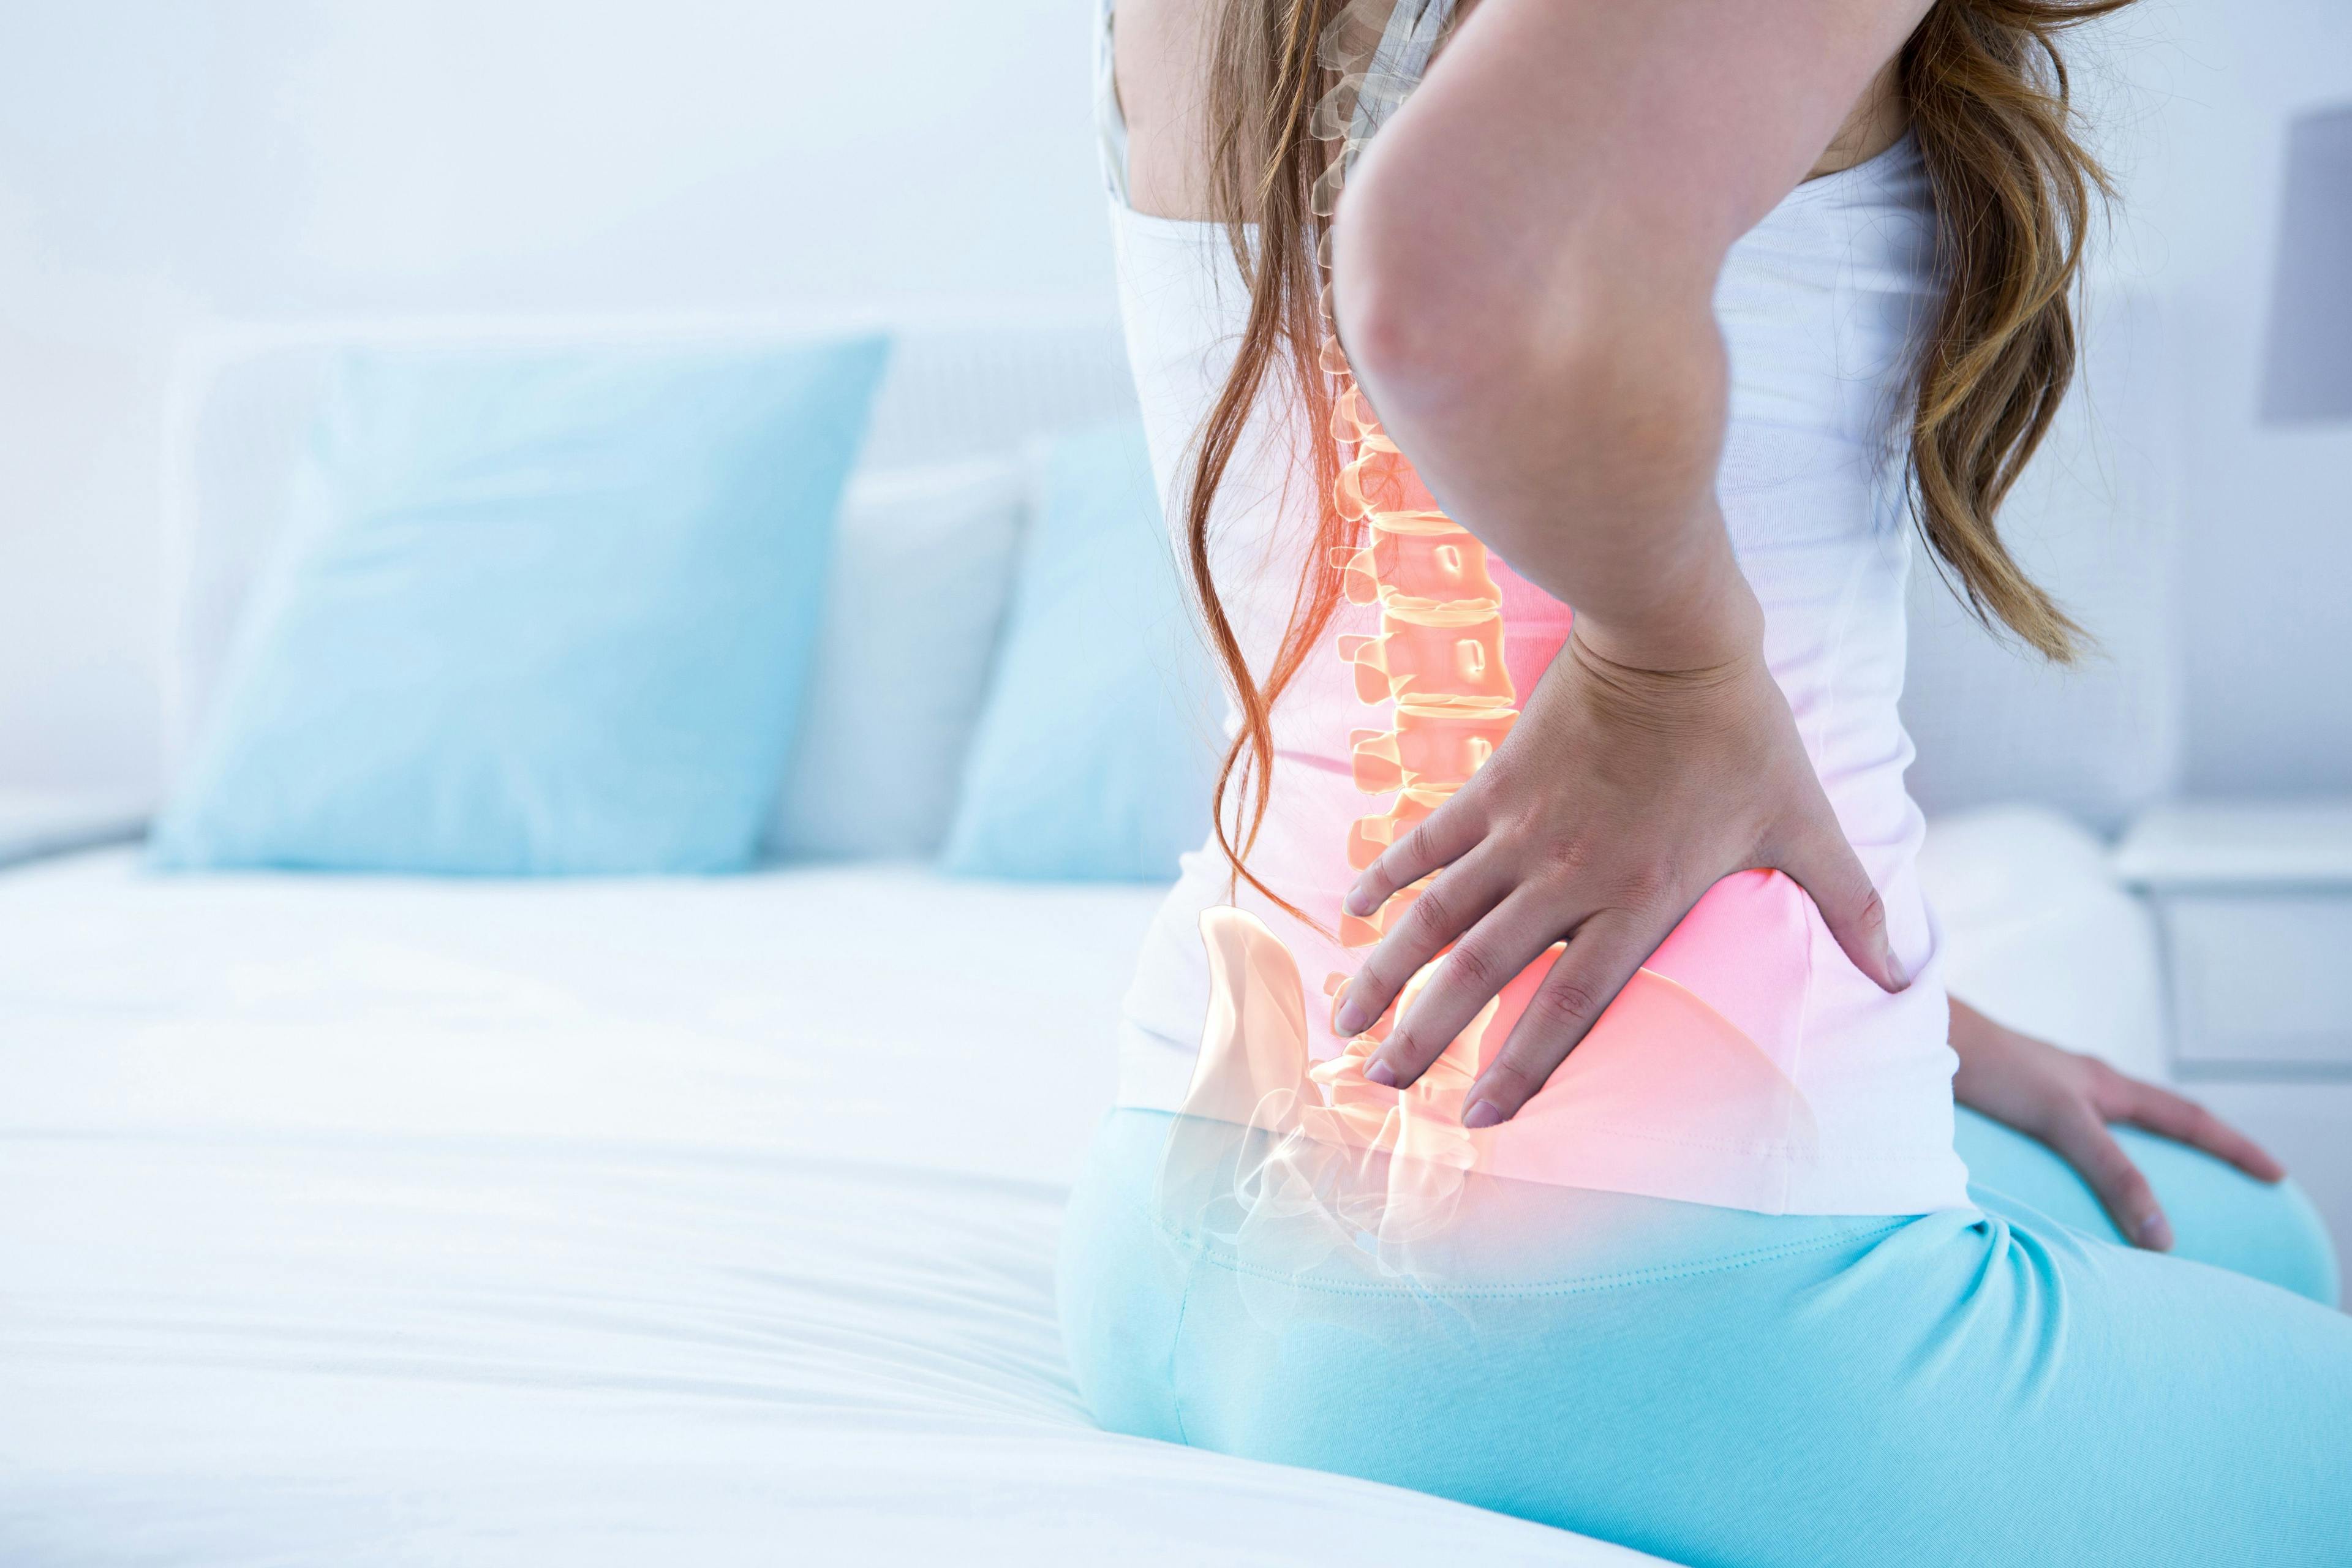 Woman sitting on bed with back pain with a highlighted spine | Image credit: WavebreakMediaMicro - stock.adobe.com